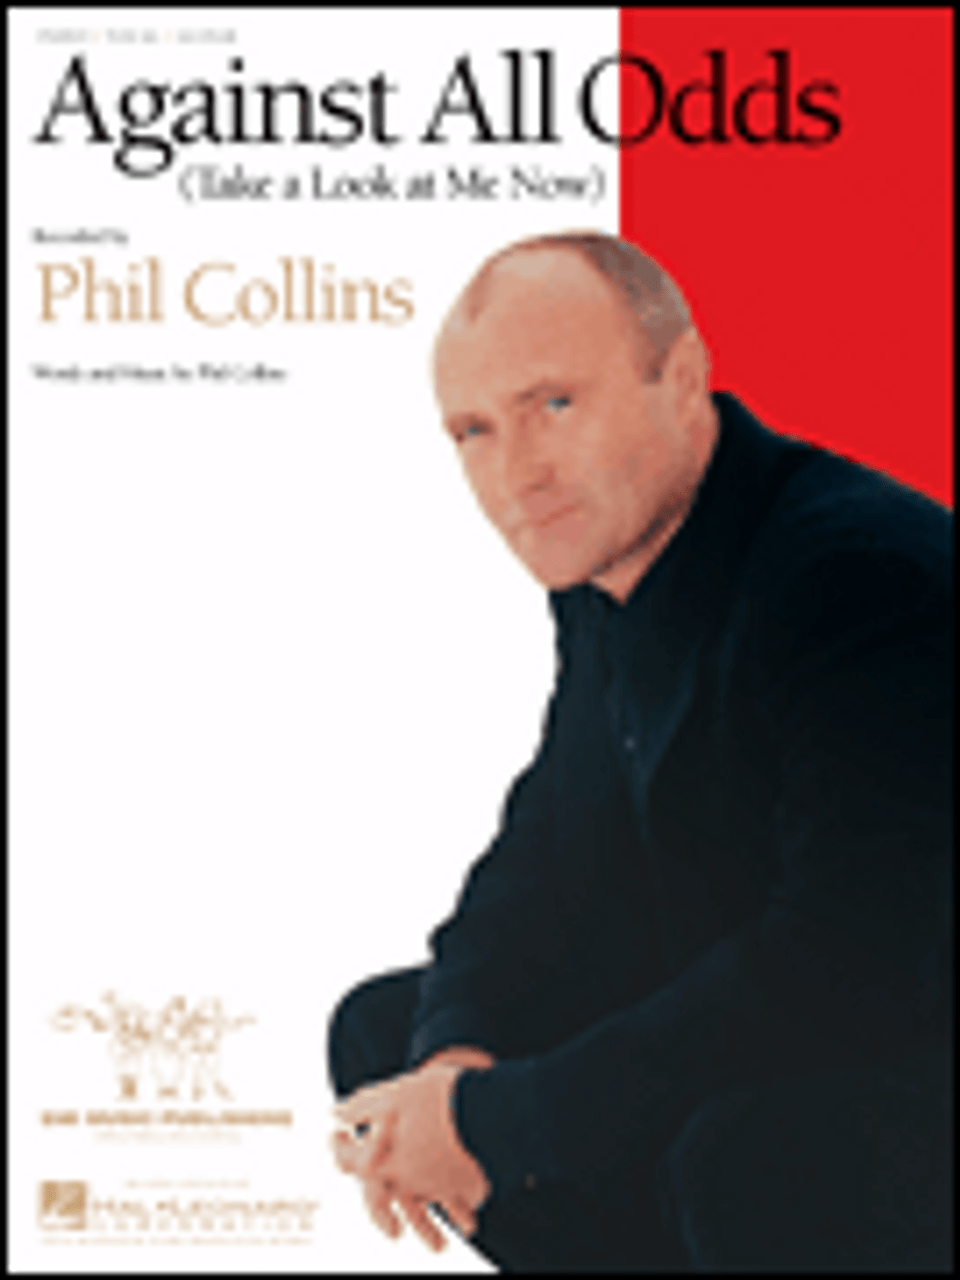 Phil Collins - Against All Odds (Take a Look At Me Now